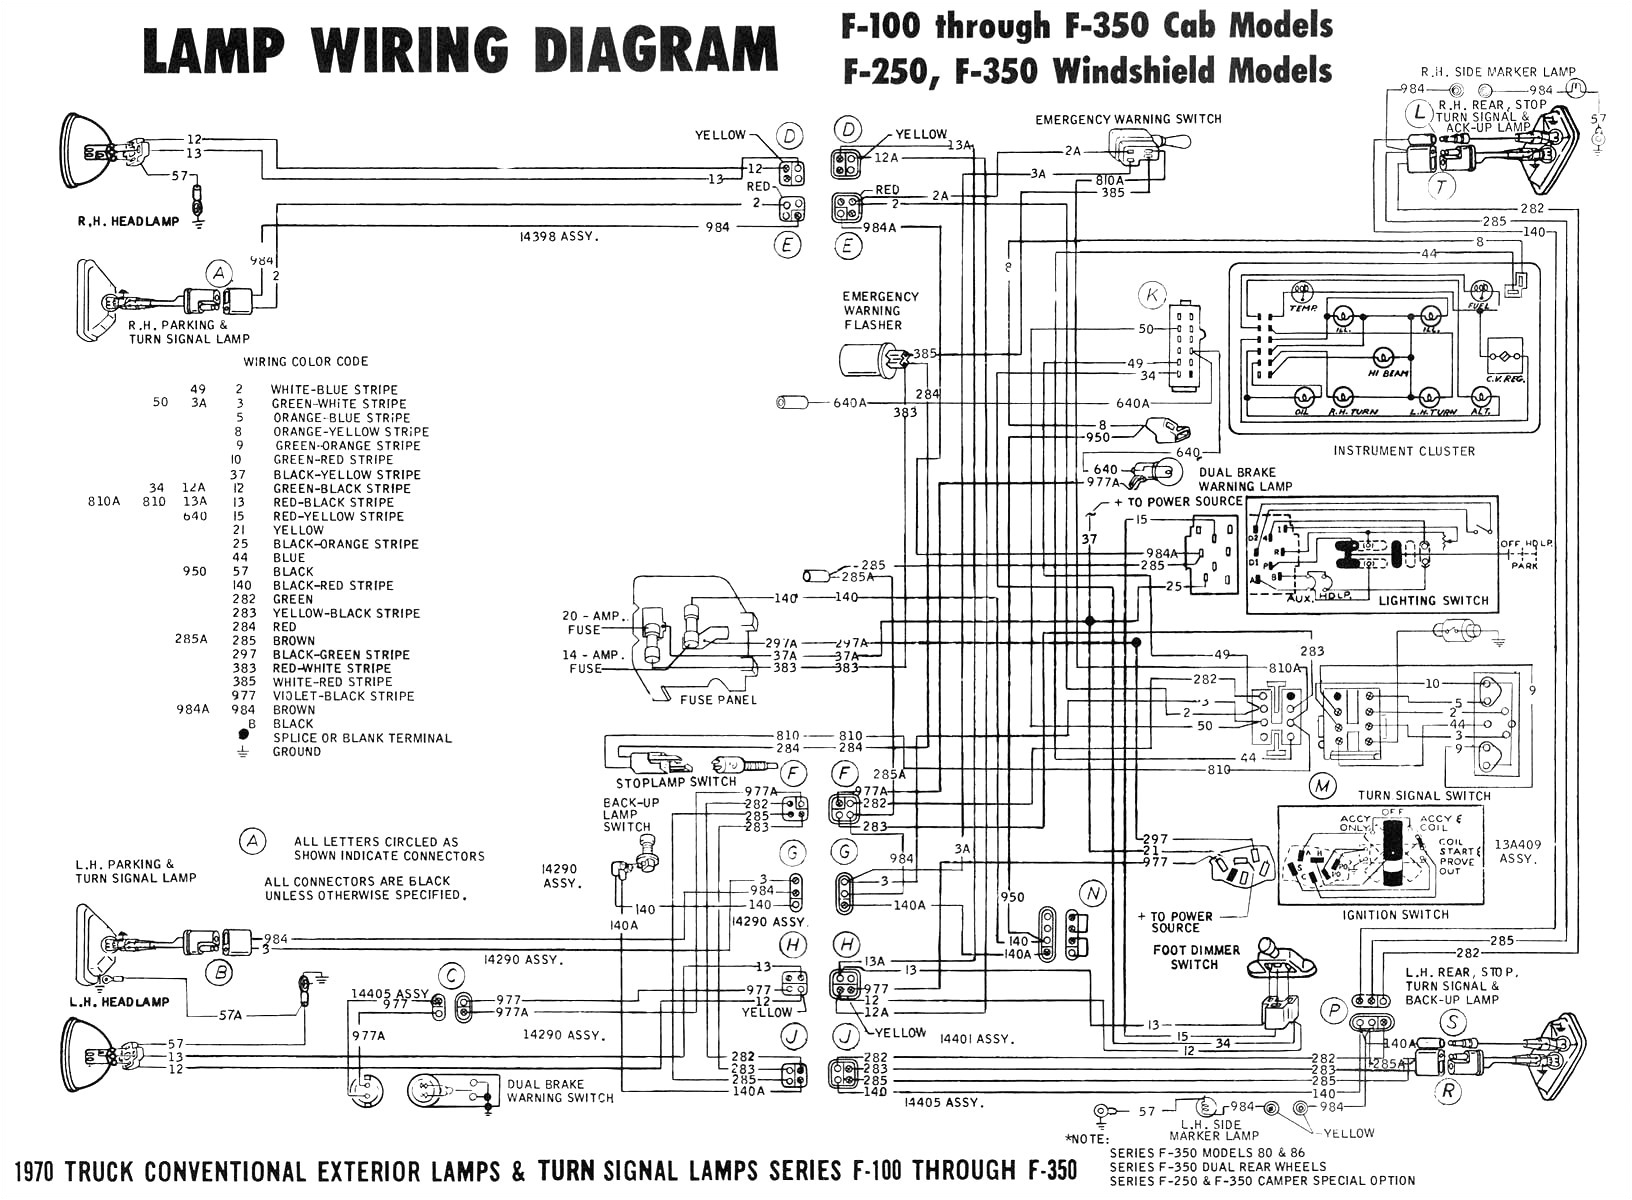 fuse diagram 1994 ford ranger autos post wiring diagram blog 1994 ford ranger engine diagrams autos post